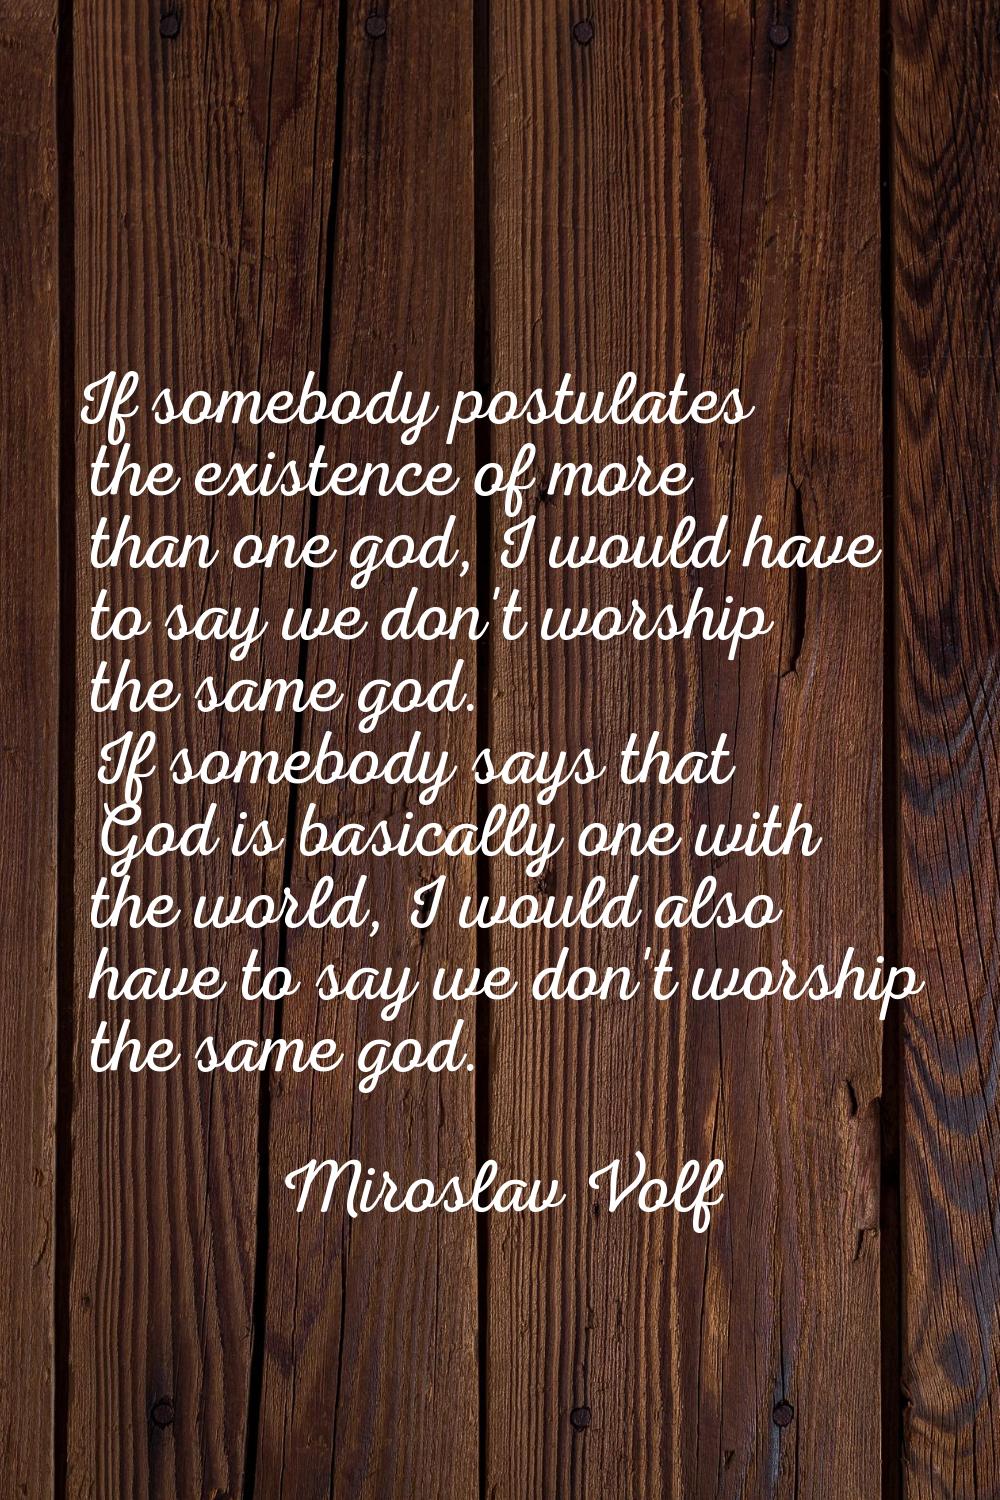 If somebody postulates the existence of more than one god, I would have to say we don't worship the